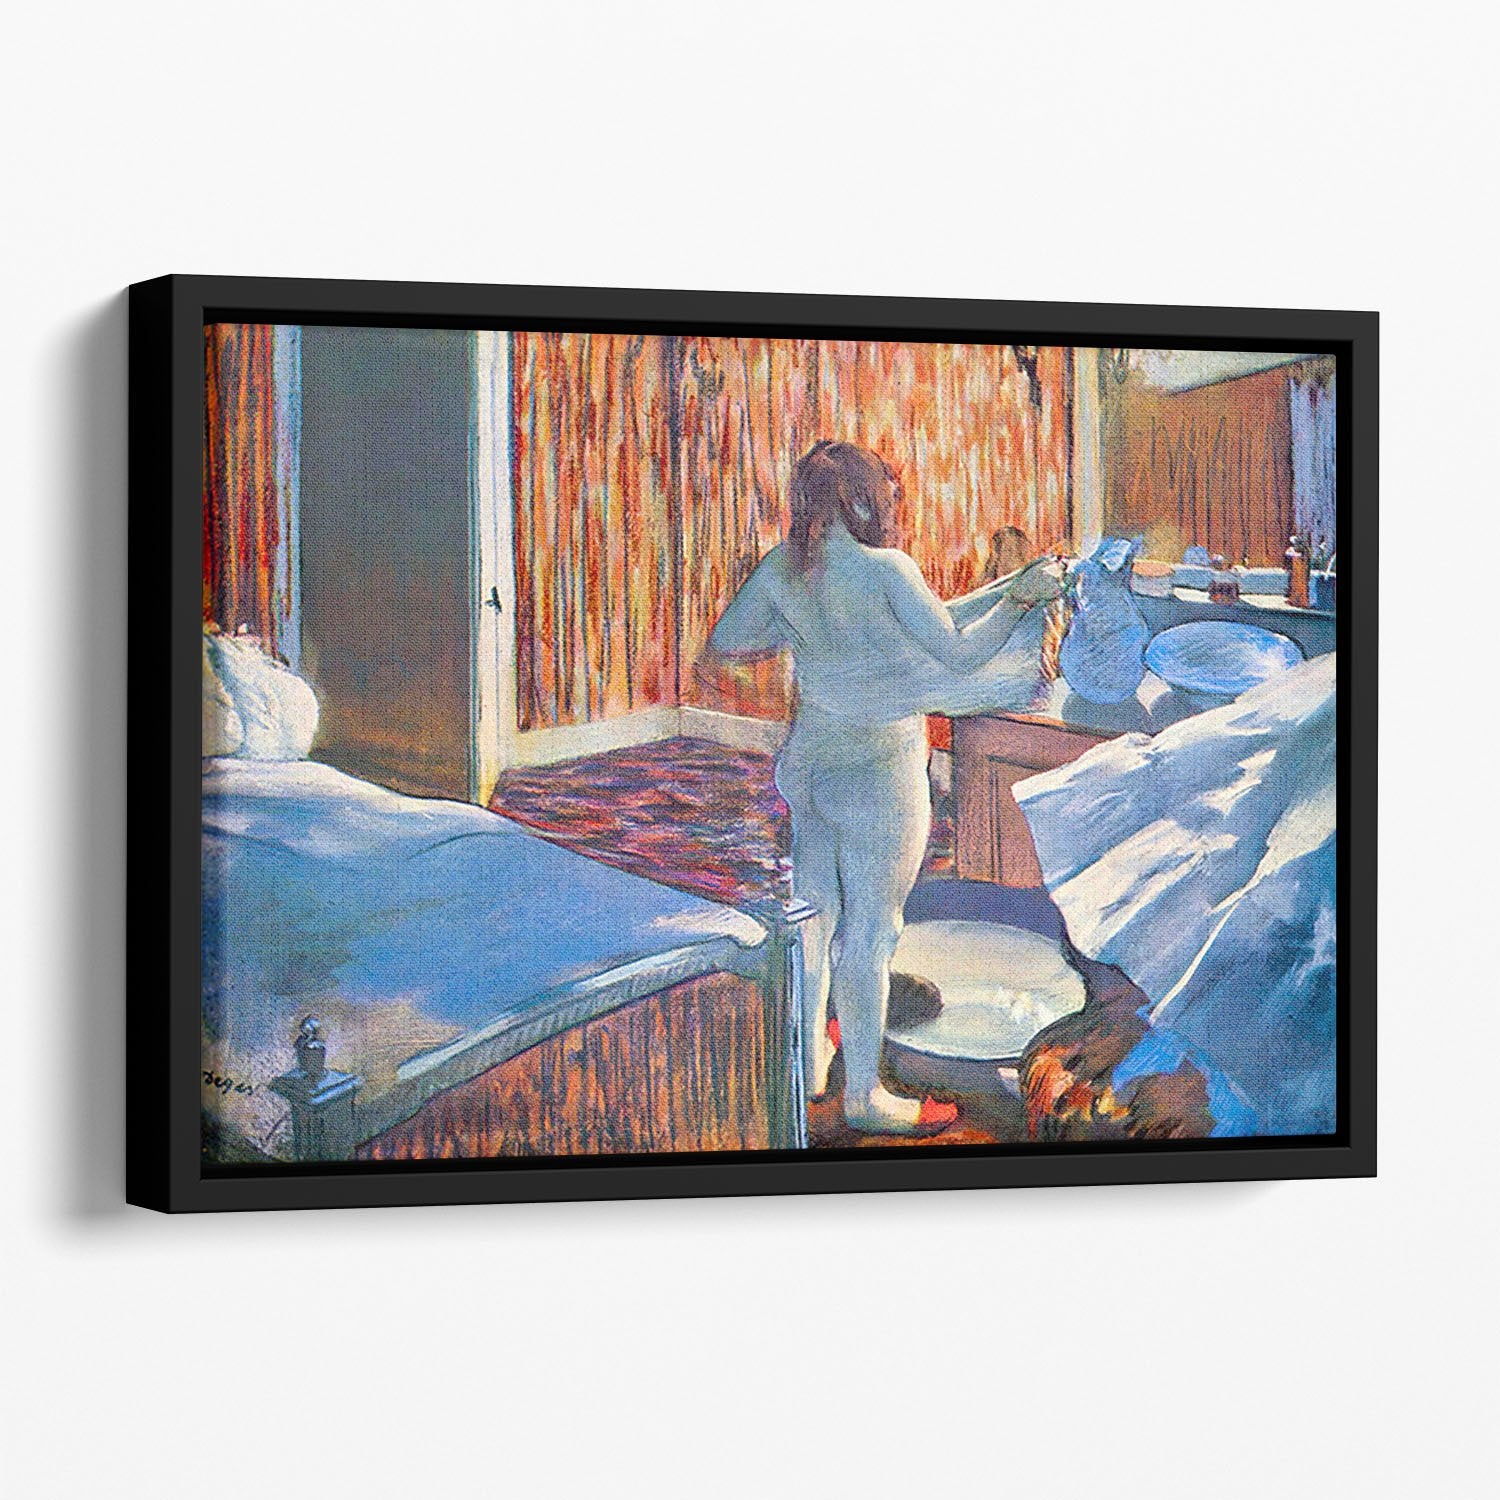 Women at the toilet 3 by Degas Floating Framed Canvas